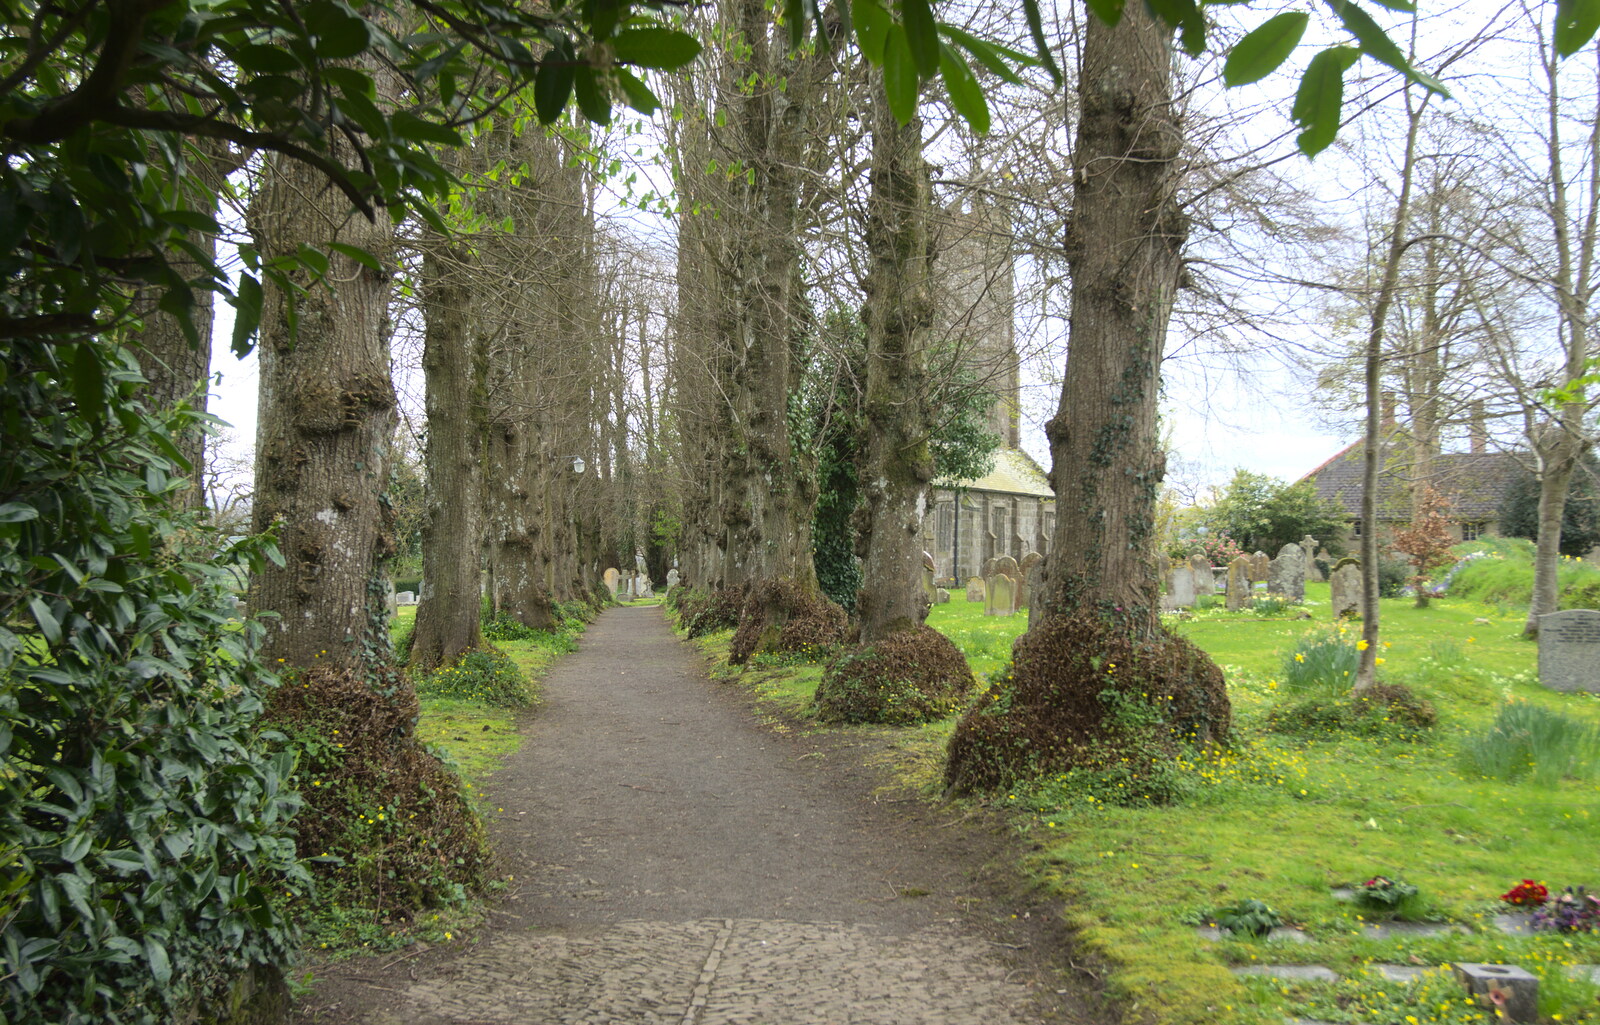 The tree-lined path to the church from Grandma J's and a Day on the Beach, Spreyton and Exmouth, Devon - 13th April 2017